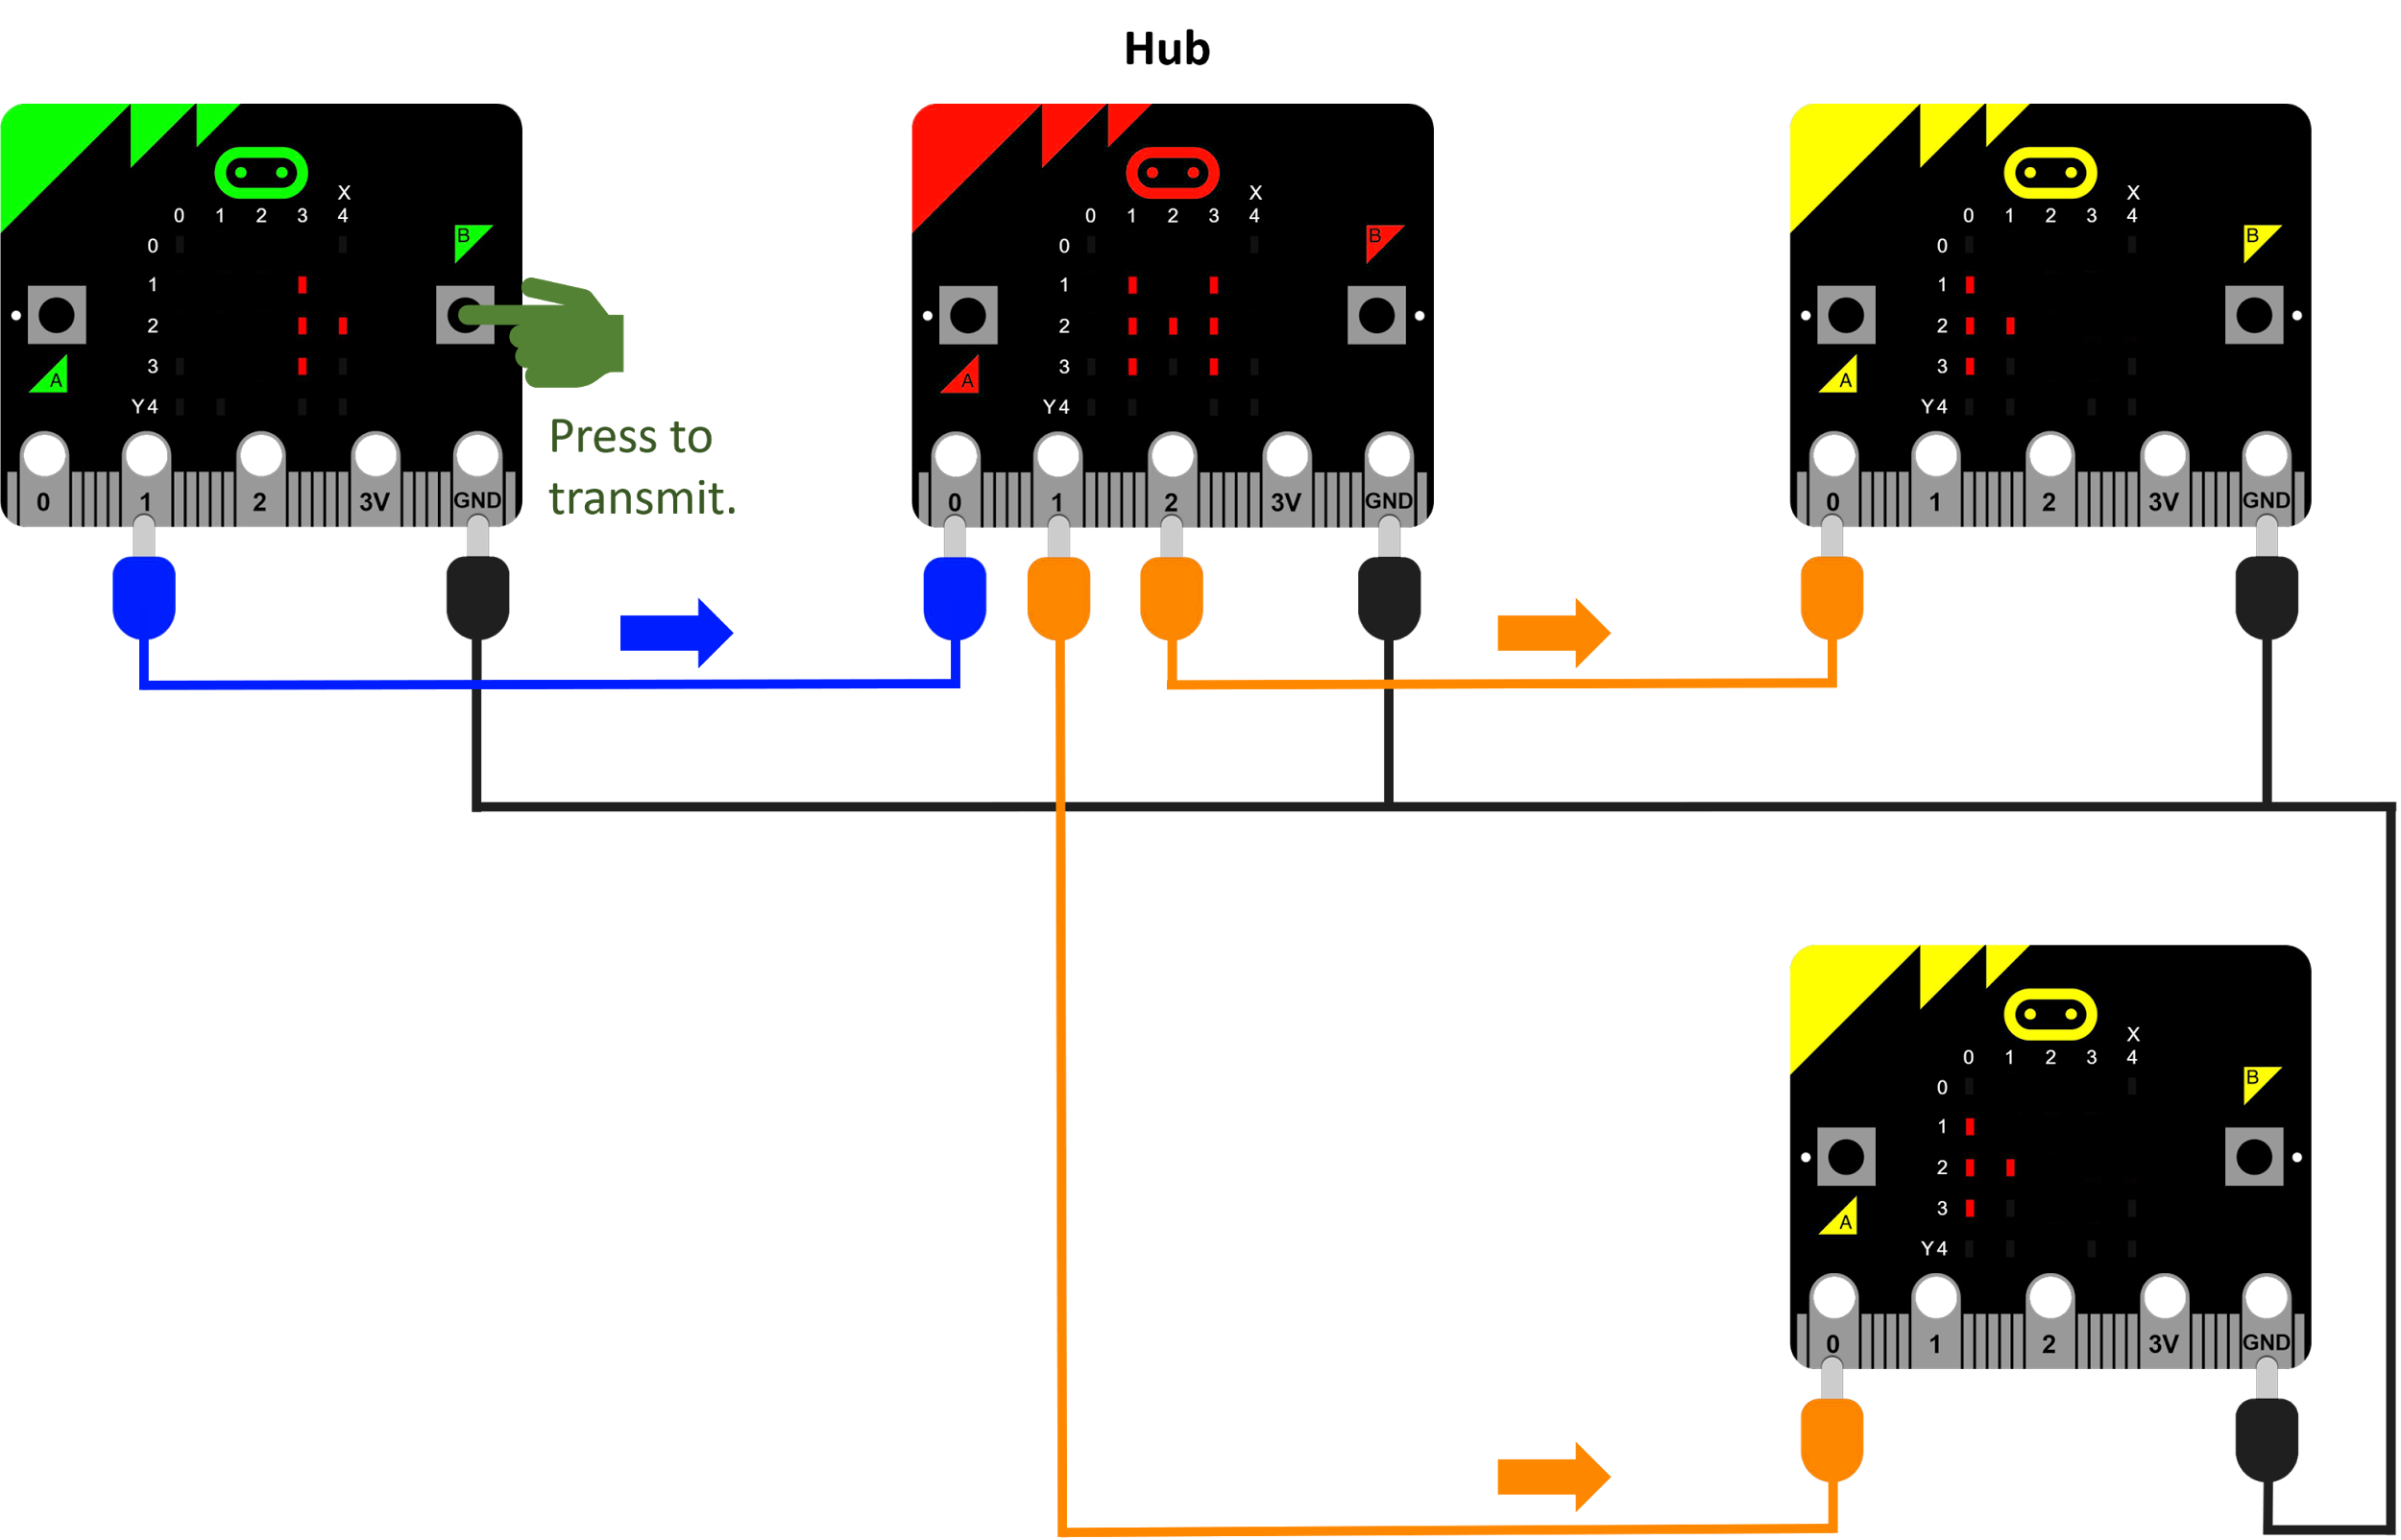 Diagram of four micro:bits connected together. Device 1 is the transmitter. It is green. Devices 2 is the hub. It is red. Devices 3 and 4 are the receivers. They are yellow. Each device has a grid: an X axis labelled 0, 1, 2, 3, 4; and a Y axis labelled 0, 1, 2, 3, 4. Each device has two buttons labelled A and B. Each device has five pins labelled 0, 1, 2, 3V and GND. On Device 1, Button B is being pressed. Device 1 has four lights lit up (X axis listed first, then Y axis): 3, 1; 3, 2; 4, 2; 3, 3. Device 2 has seven lights lit up: 1, 1; 3, 1; 2, 1; 2, 2; 3, 2; 1, 3; 3, 3. Devices 3 and 4 have four lights lit up: 0, 1; 0, 2; 1, 2; 0, 3. Connecting cable 1 is connected to Device 1, Pin 1. It is connected to Device 2, Pin 0. An arrow points from Device 1 to Device 2. The cable is blue. Connecting cable 2 connects Device 2 to Device 3. It connects Device 2 Pin 2 to Device 3 Pin 0. An arrow points from Device 2 to Device 3. The cable is orange. Connecting cable 3 connects Device 2 to Device 4. It connects Device 2 Pin 1 to Device 4 Pin 0. An arrow points from Device 2 to Device 4. The cable is orange. Connecting cable 4 connects the GND pins on the four devices together. The cable is black.